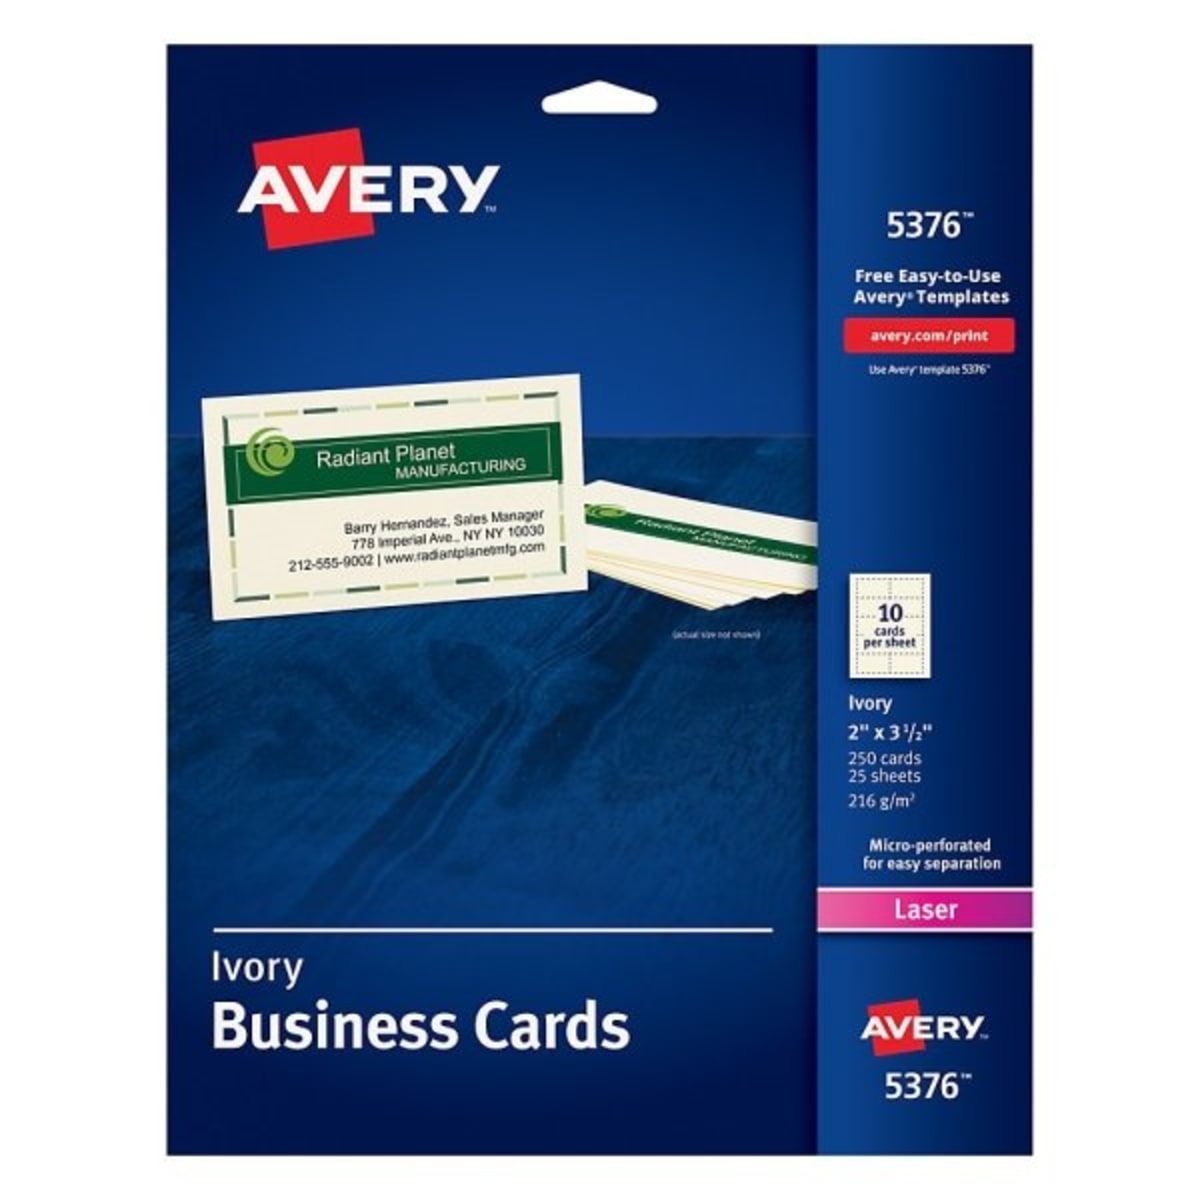 avery-label-templates-business-cards-template-1-resume-examples-6v3rlpr17b